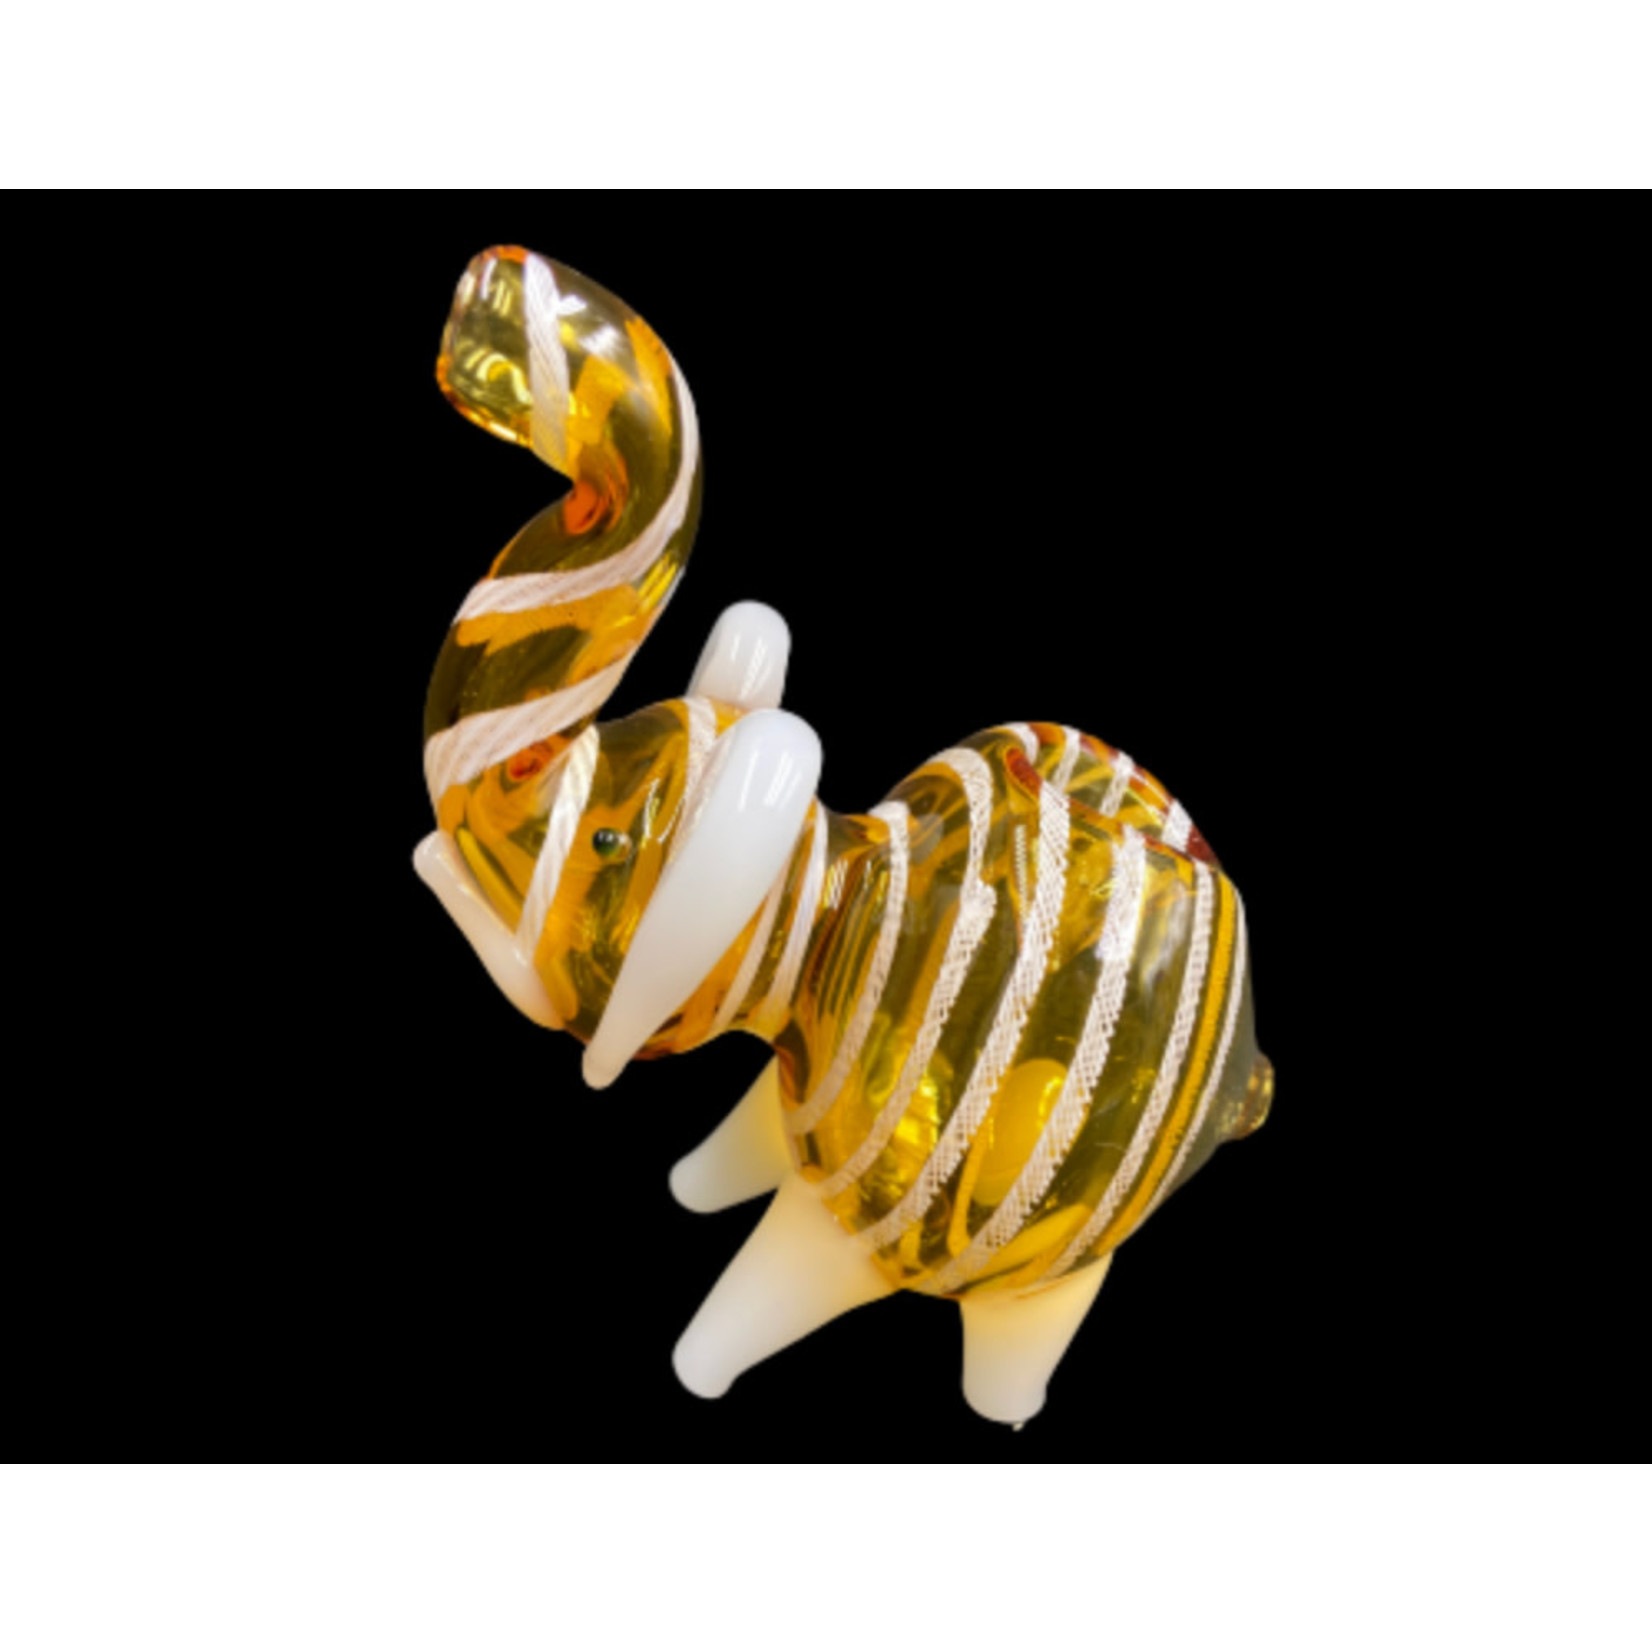 4” 130Gr. All Tube Striped Elephant Glass Pipe